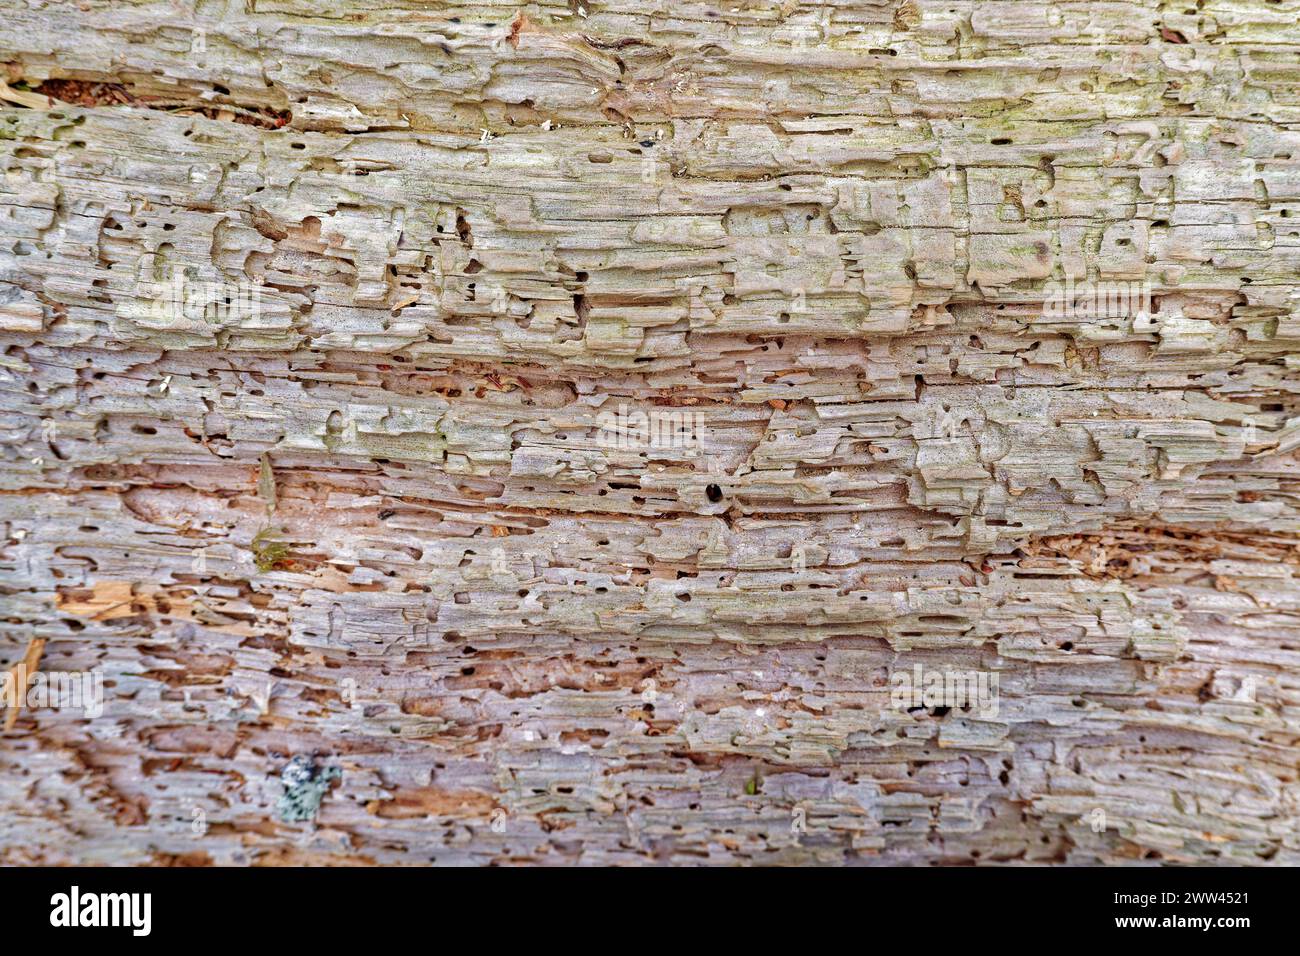 Closeup view of a rotting tree dry with no bark left lots of insect holes and cavities for backgrounds wallpaper textures backdrops flat-lays and copy Stock Photo